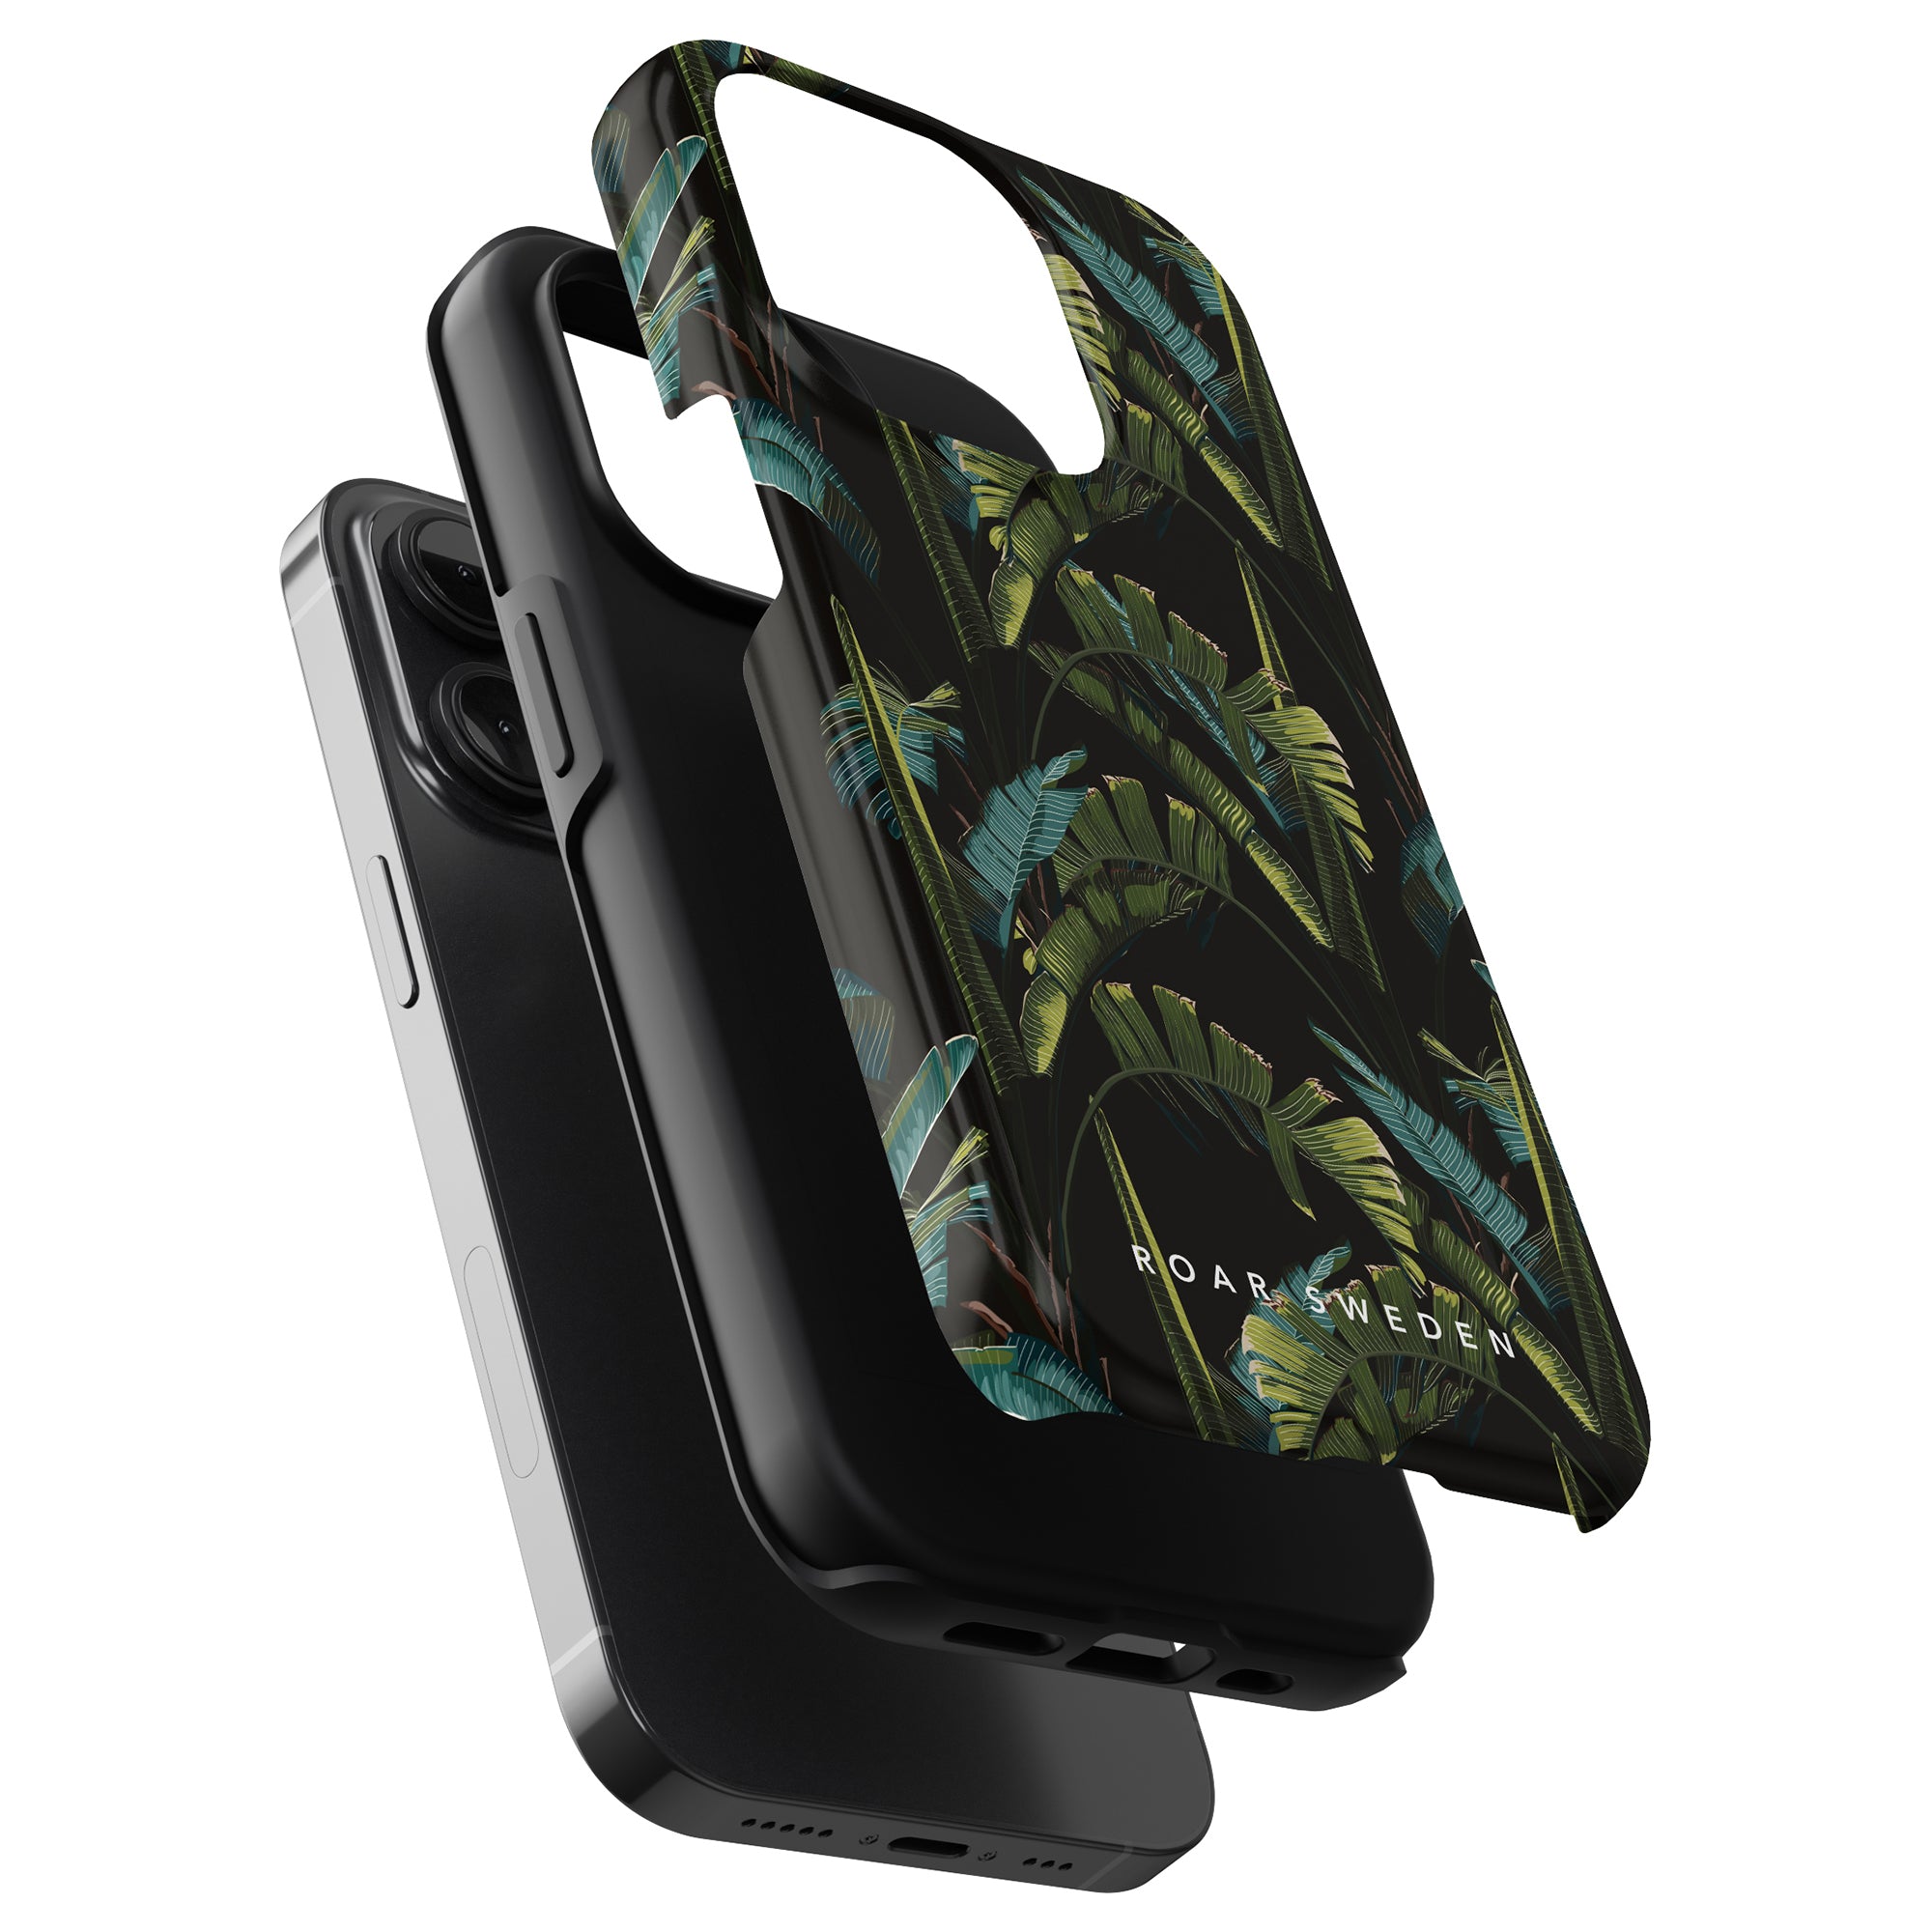 A stack of three smartphone cases with different designs, two black and one with a Mystic Jungle - Tough Case pattern.